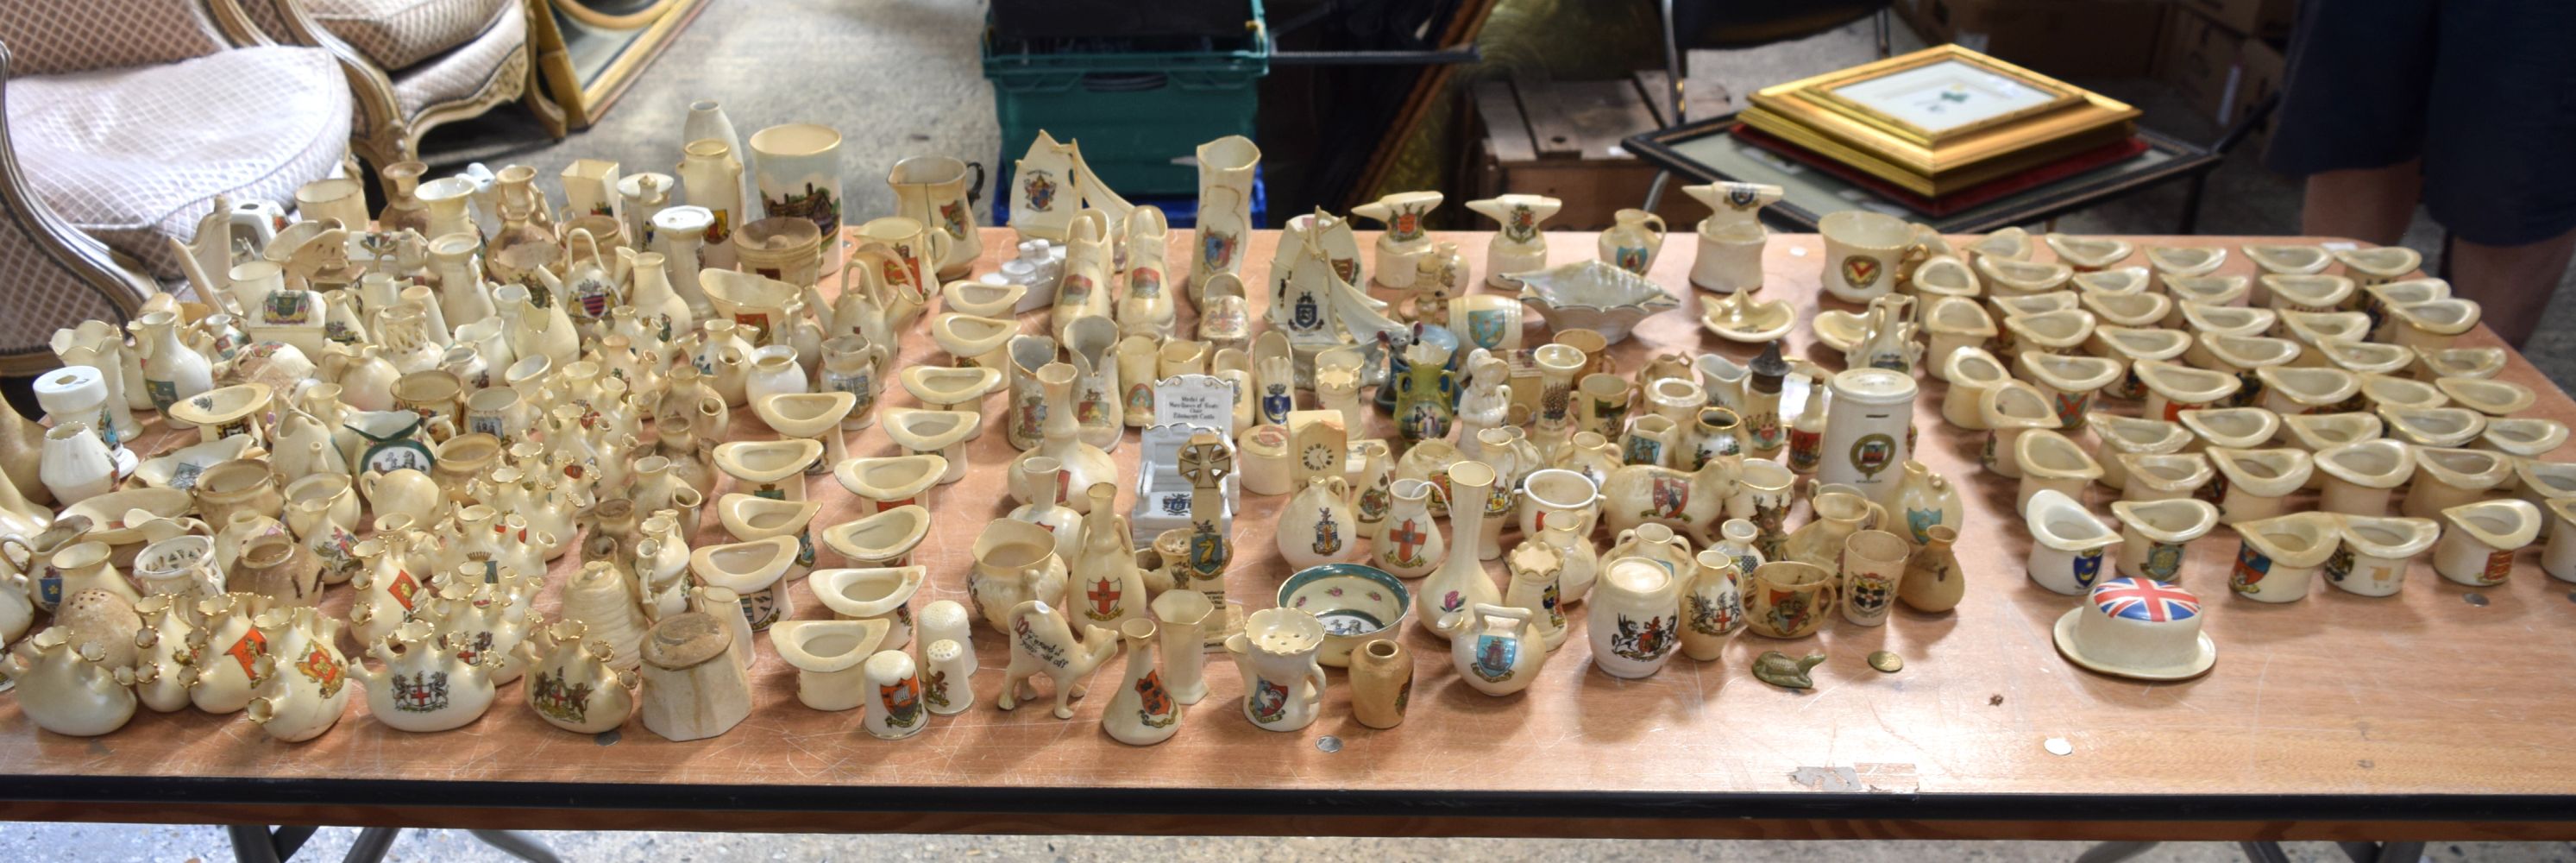 A huge collection of Heraldic ceramic items